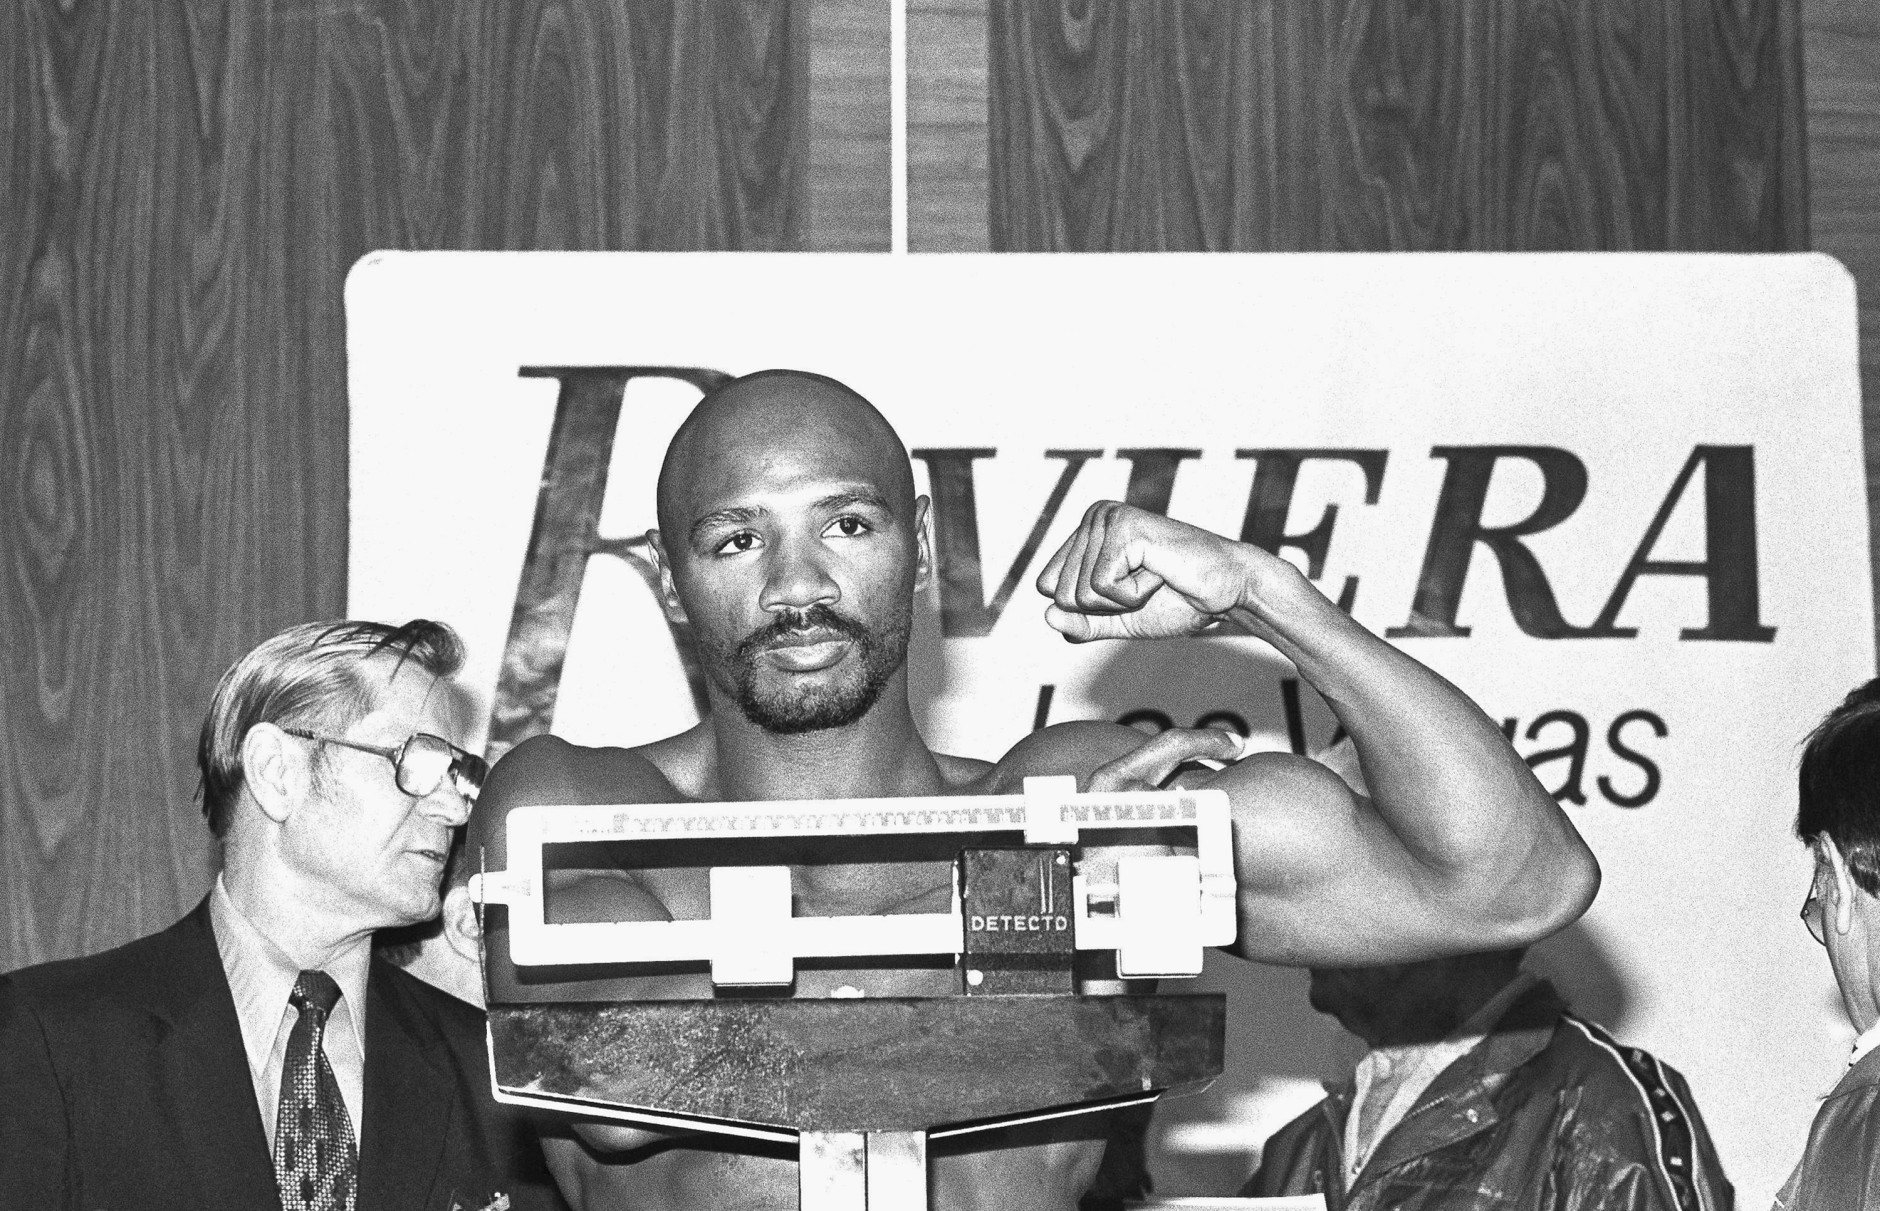 Undisputed middleweight champion Marvelous Marvin Hagler shows off his muscle during weigh-in on March 30, 1984 in Las Vegas for his championship fight with WBA number one contender Juan Roldan of Argentina at Riviera Hotel Friday night. Hagler and Roldan both weighed 159 ? pounds. (AP Photo/ Lennox McLendon)